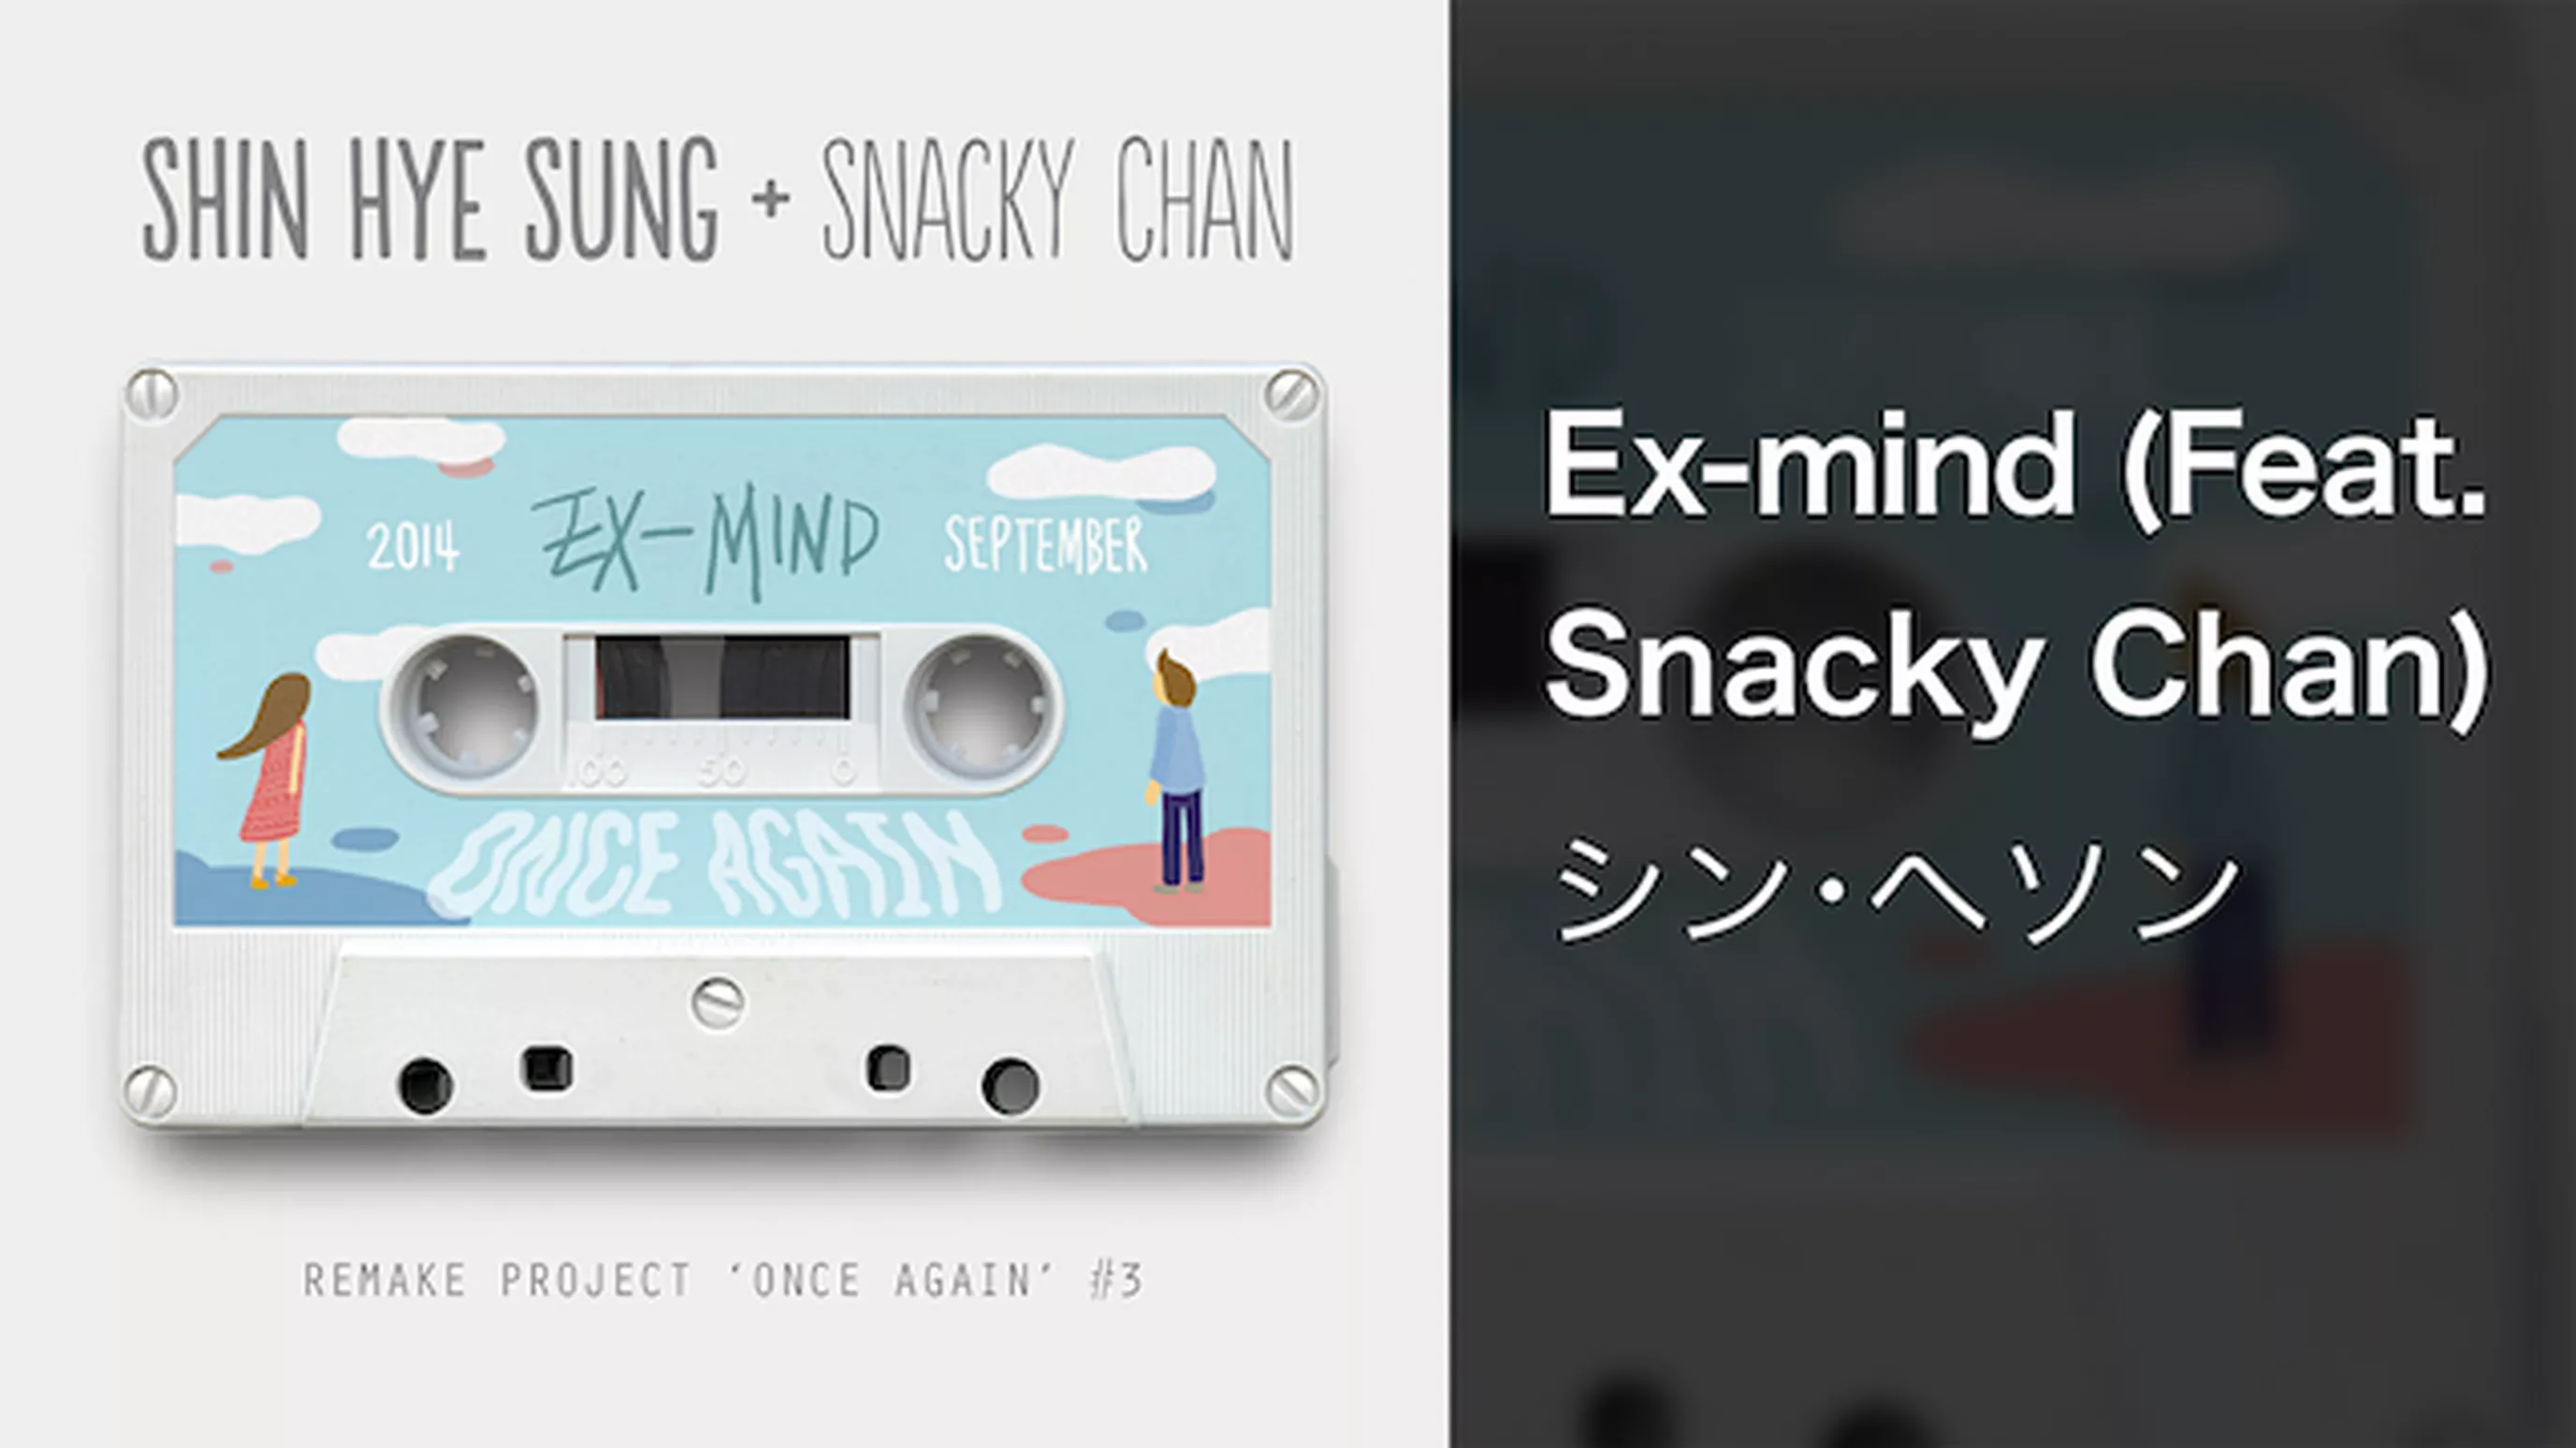 Ex-mind (Feat. Snacky Chan)